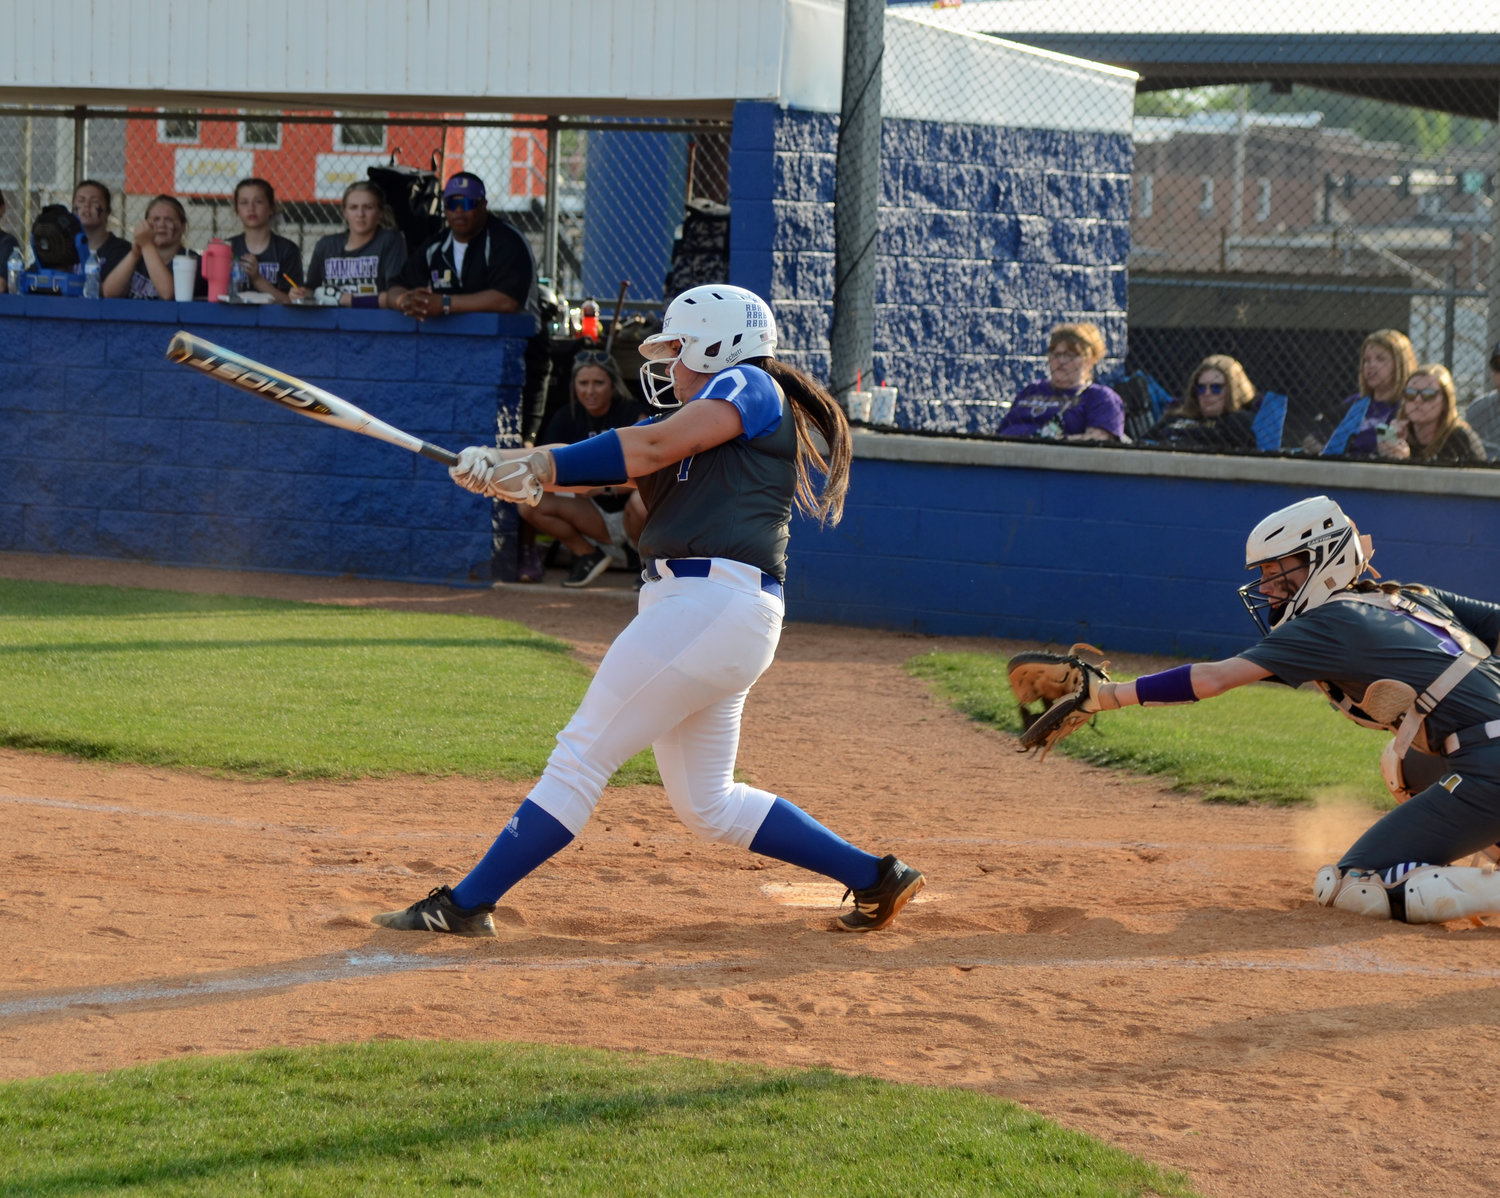 Carli Warner drives in a run to open the scoring in the bottom of the first inning.